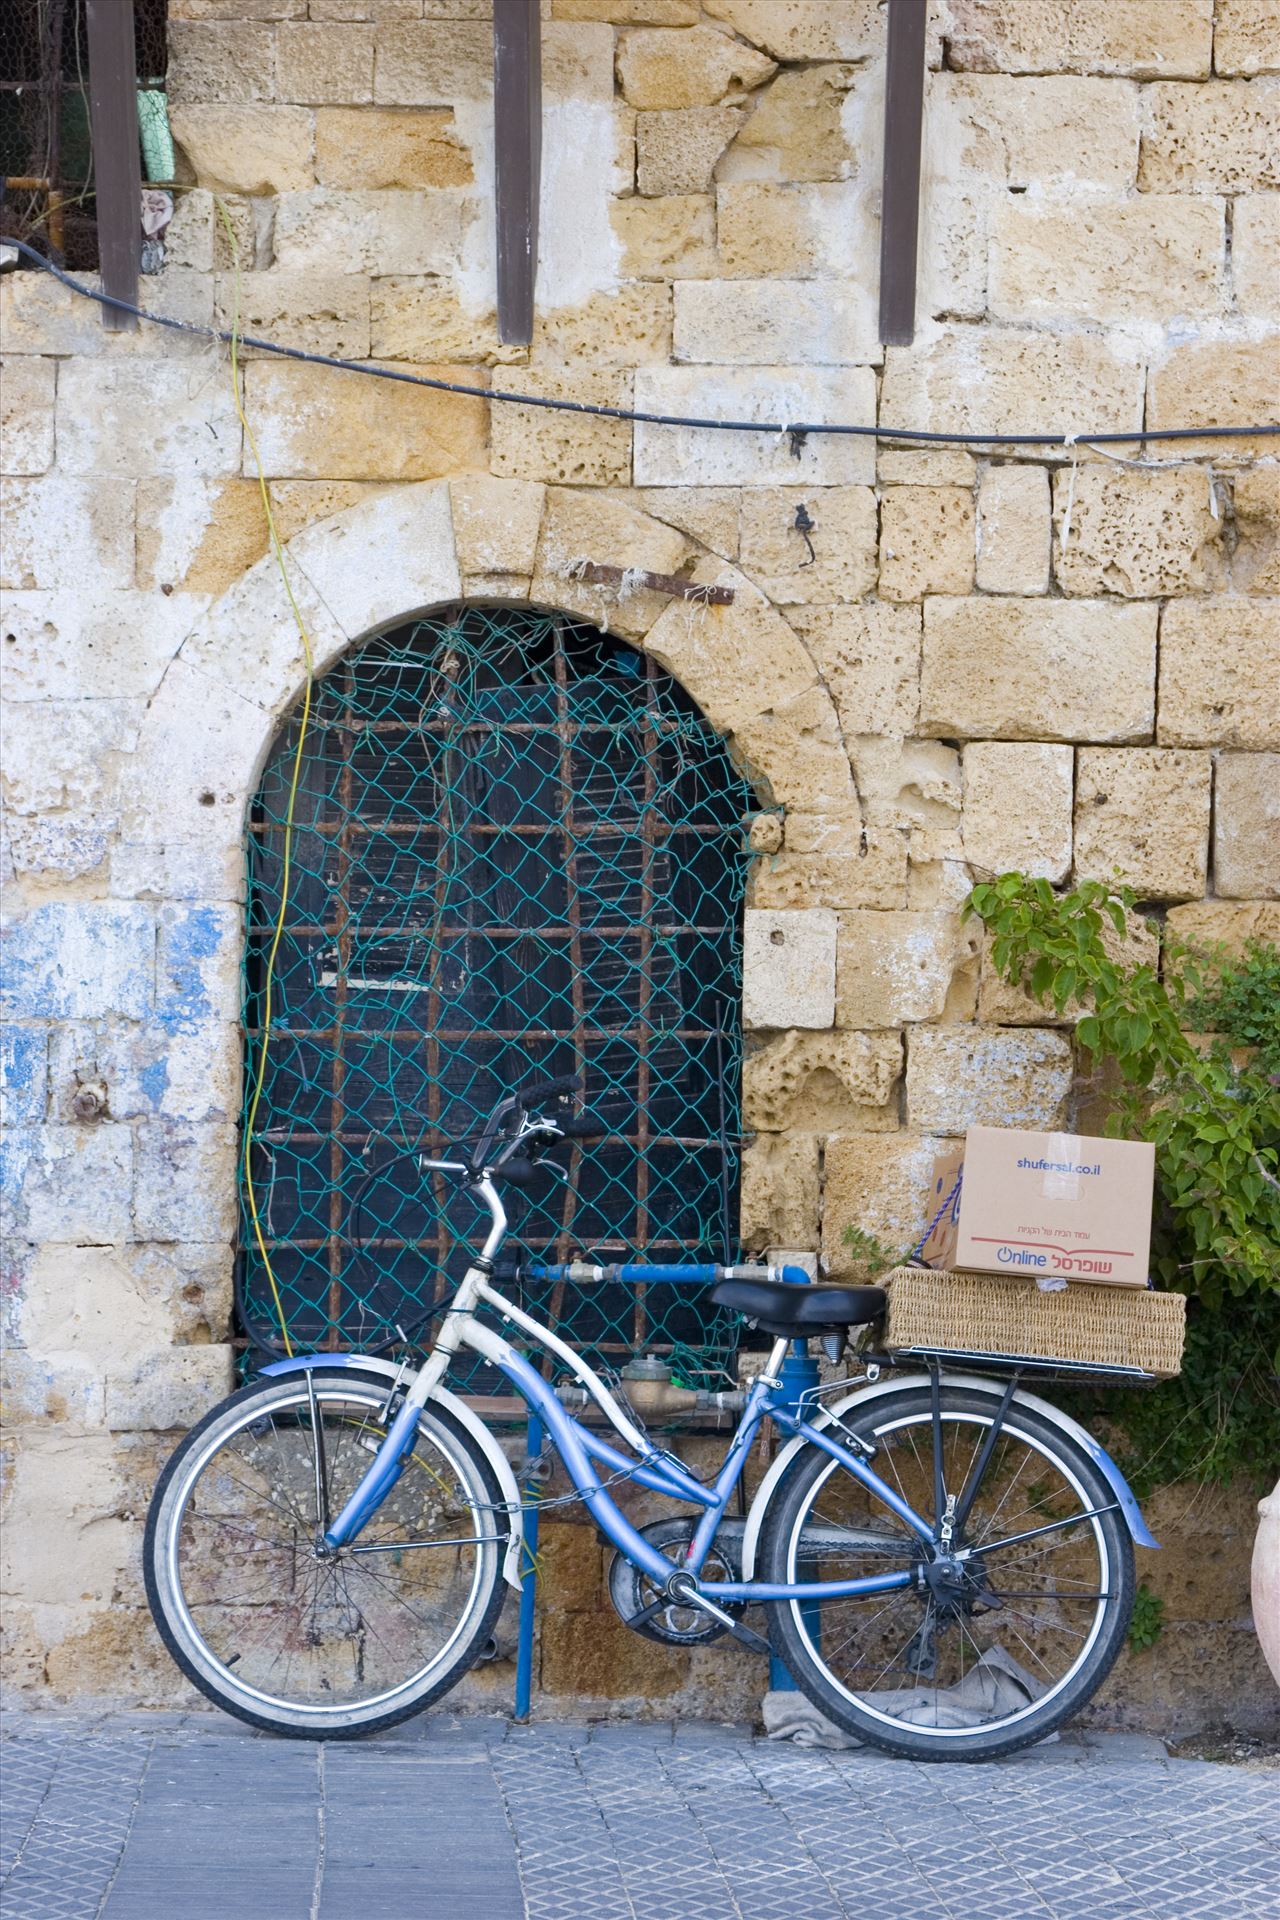 Solo Bike Parking Bicycle near an old building by Inna Ricardo-Lax Photography